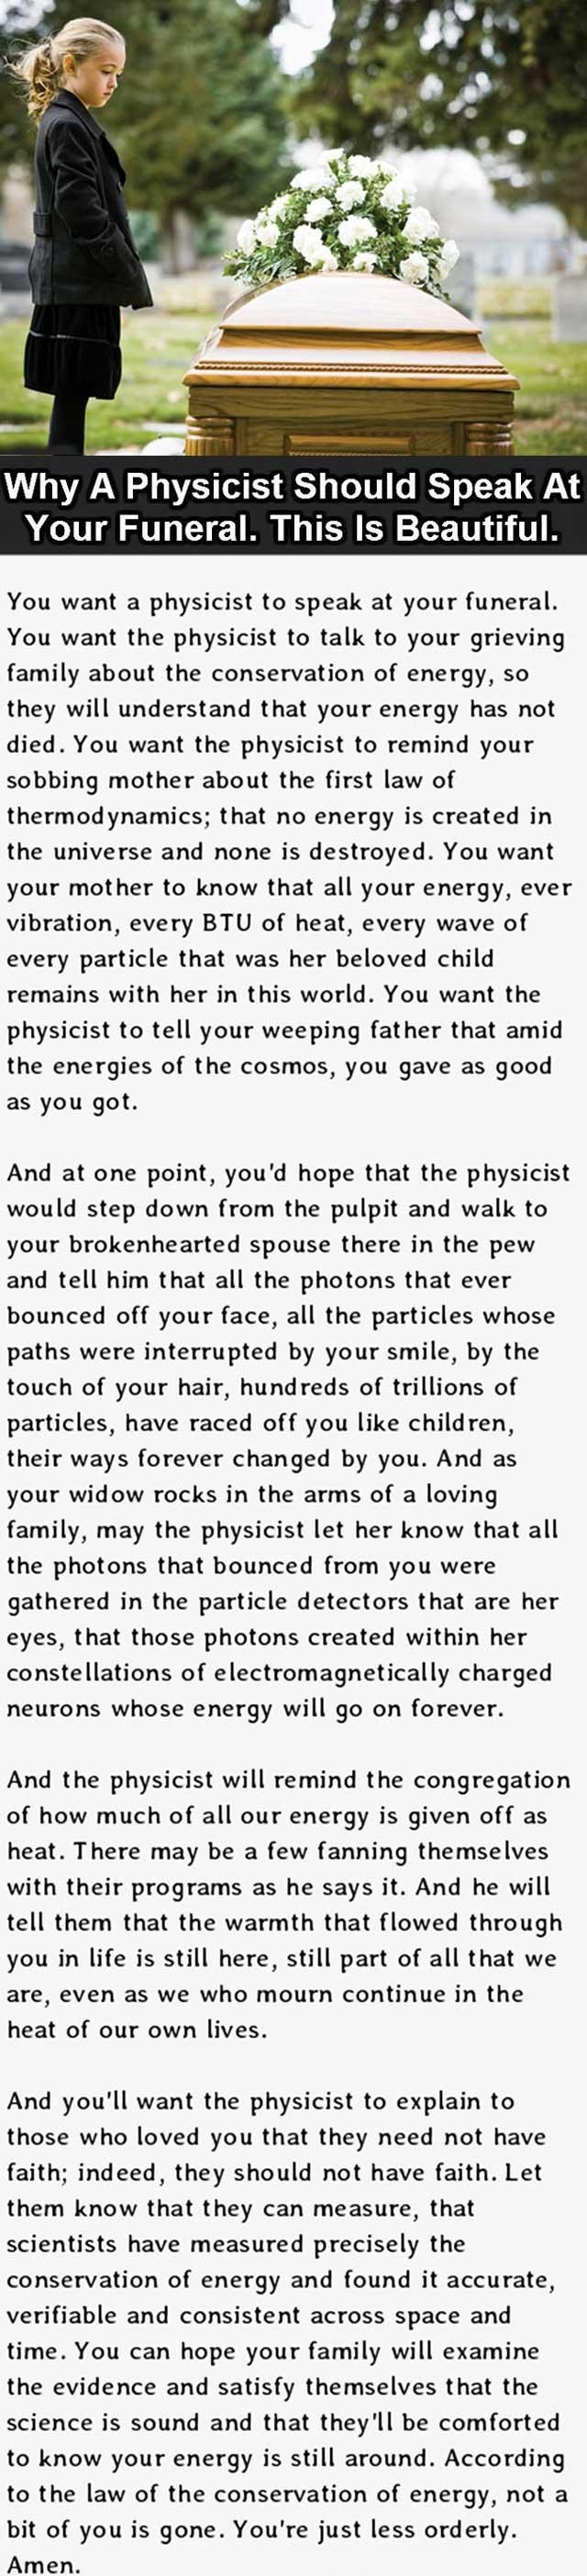 Why a physicist should speak at your funeral.